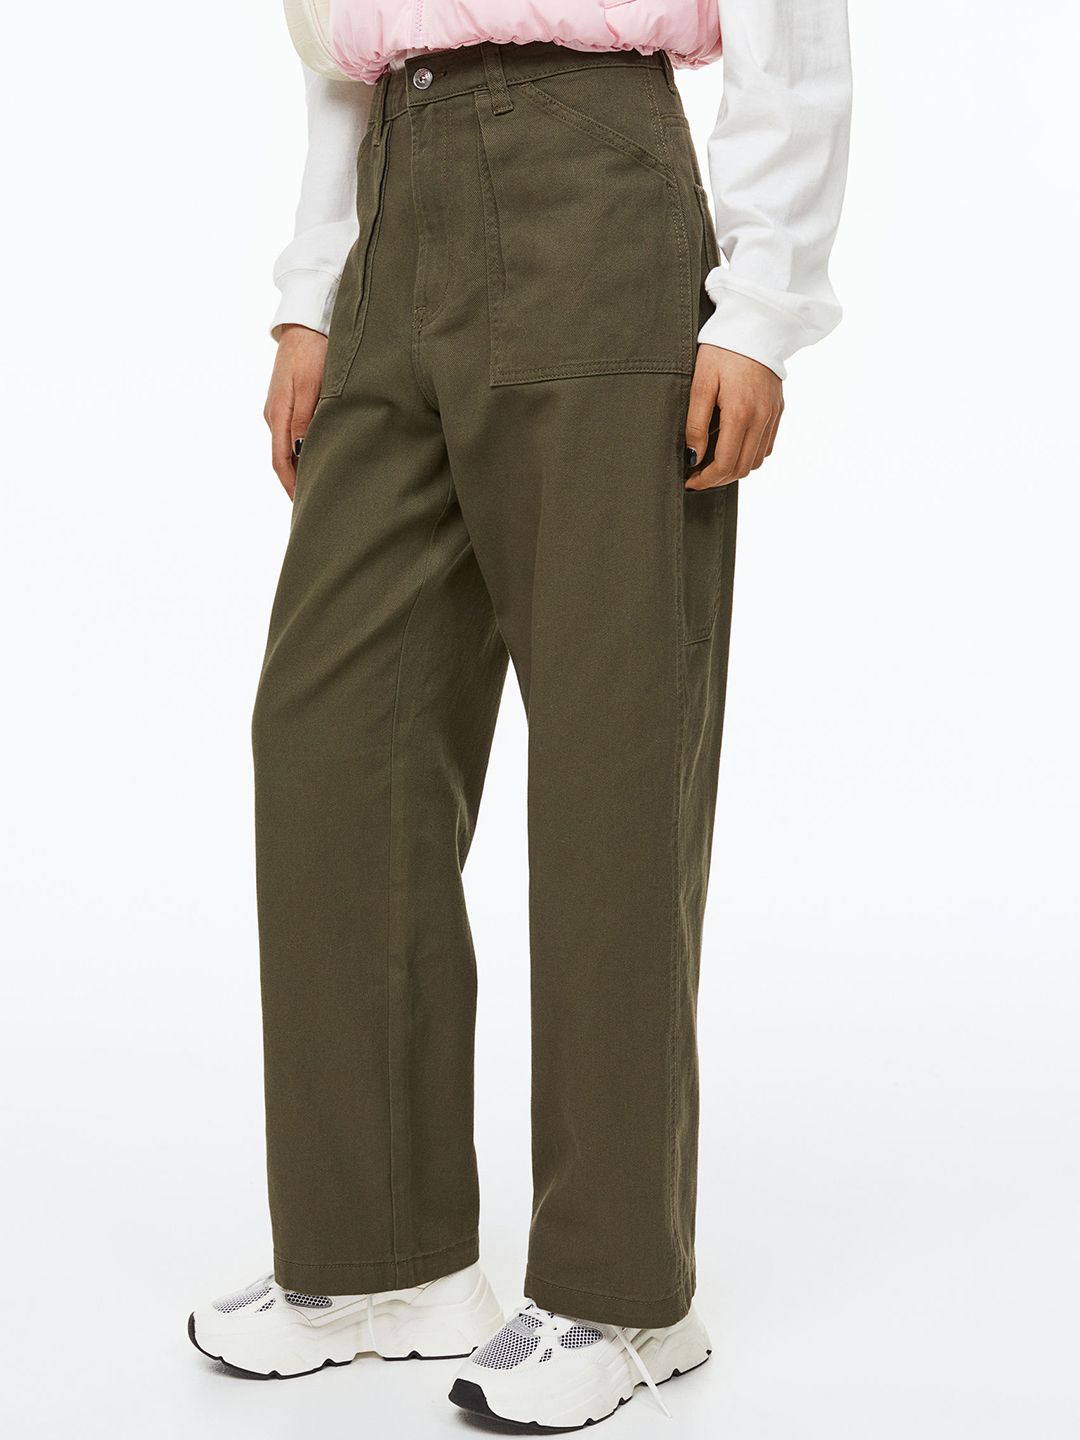 H&M Women Pure Cotton Twill Cargo Trousers Price in India, Full